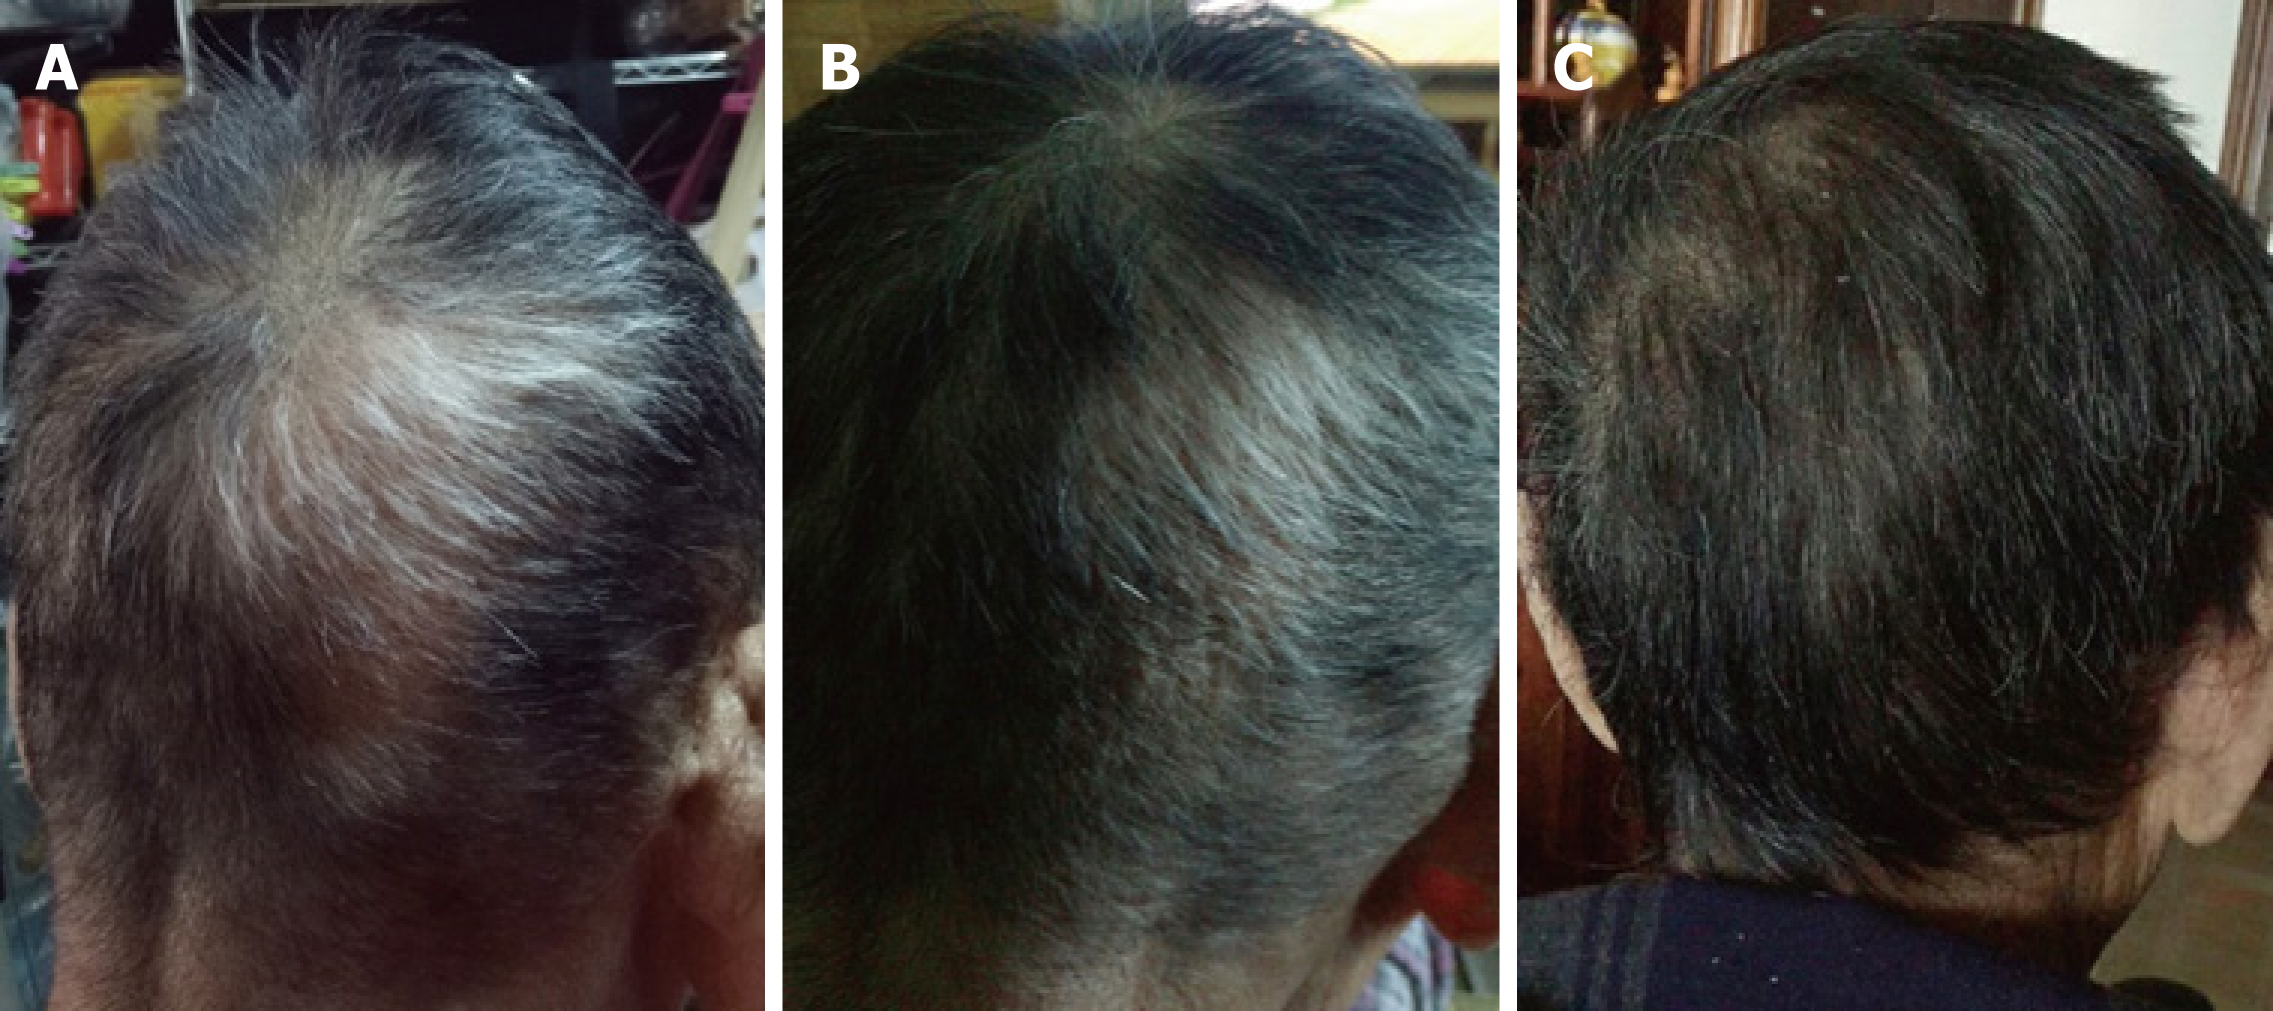 Hair regrowth following fecal microbiota transplantation in an elderly  patient with alopecia areata: A case report and review of the literature